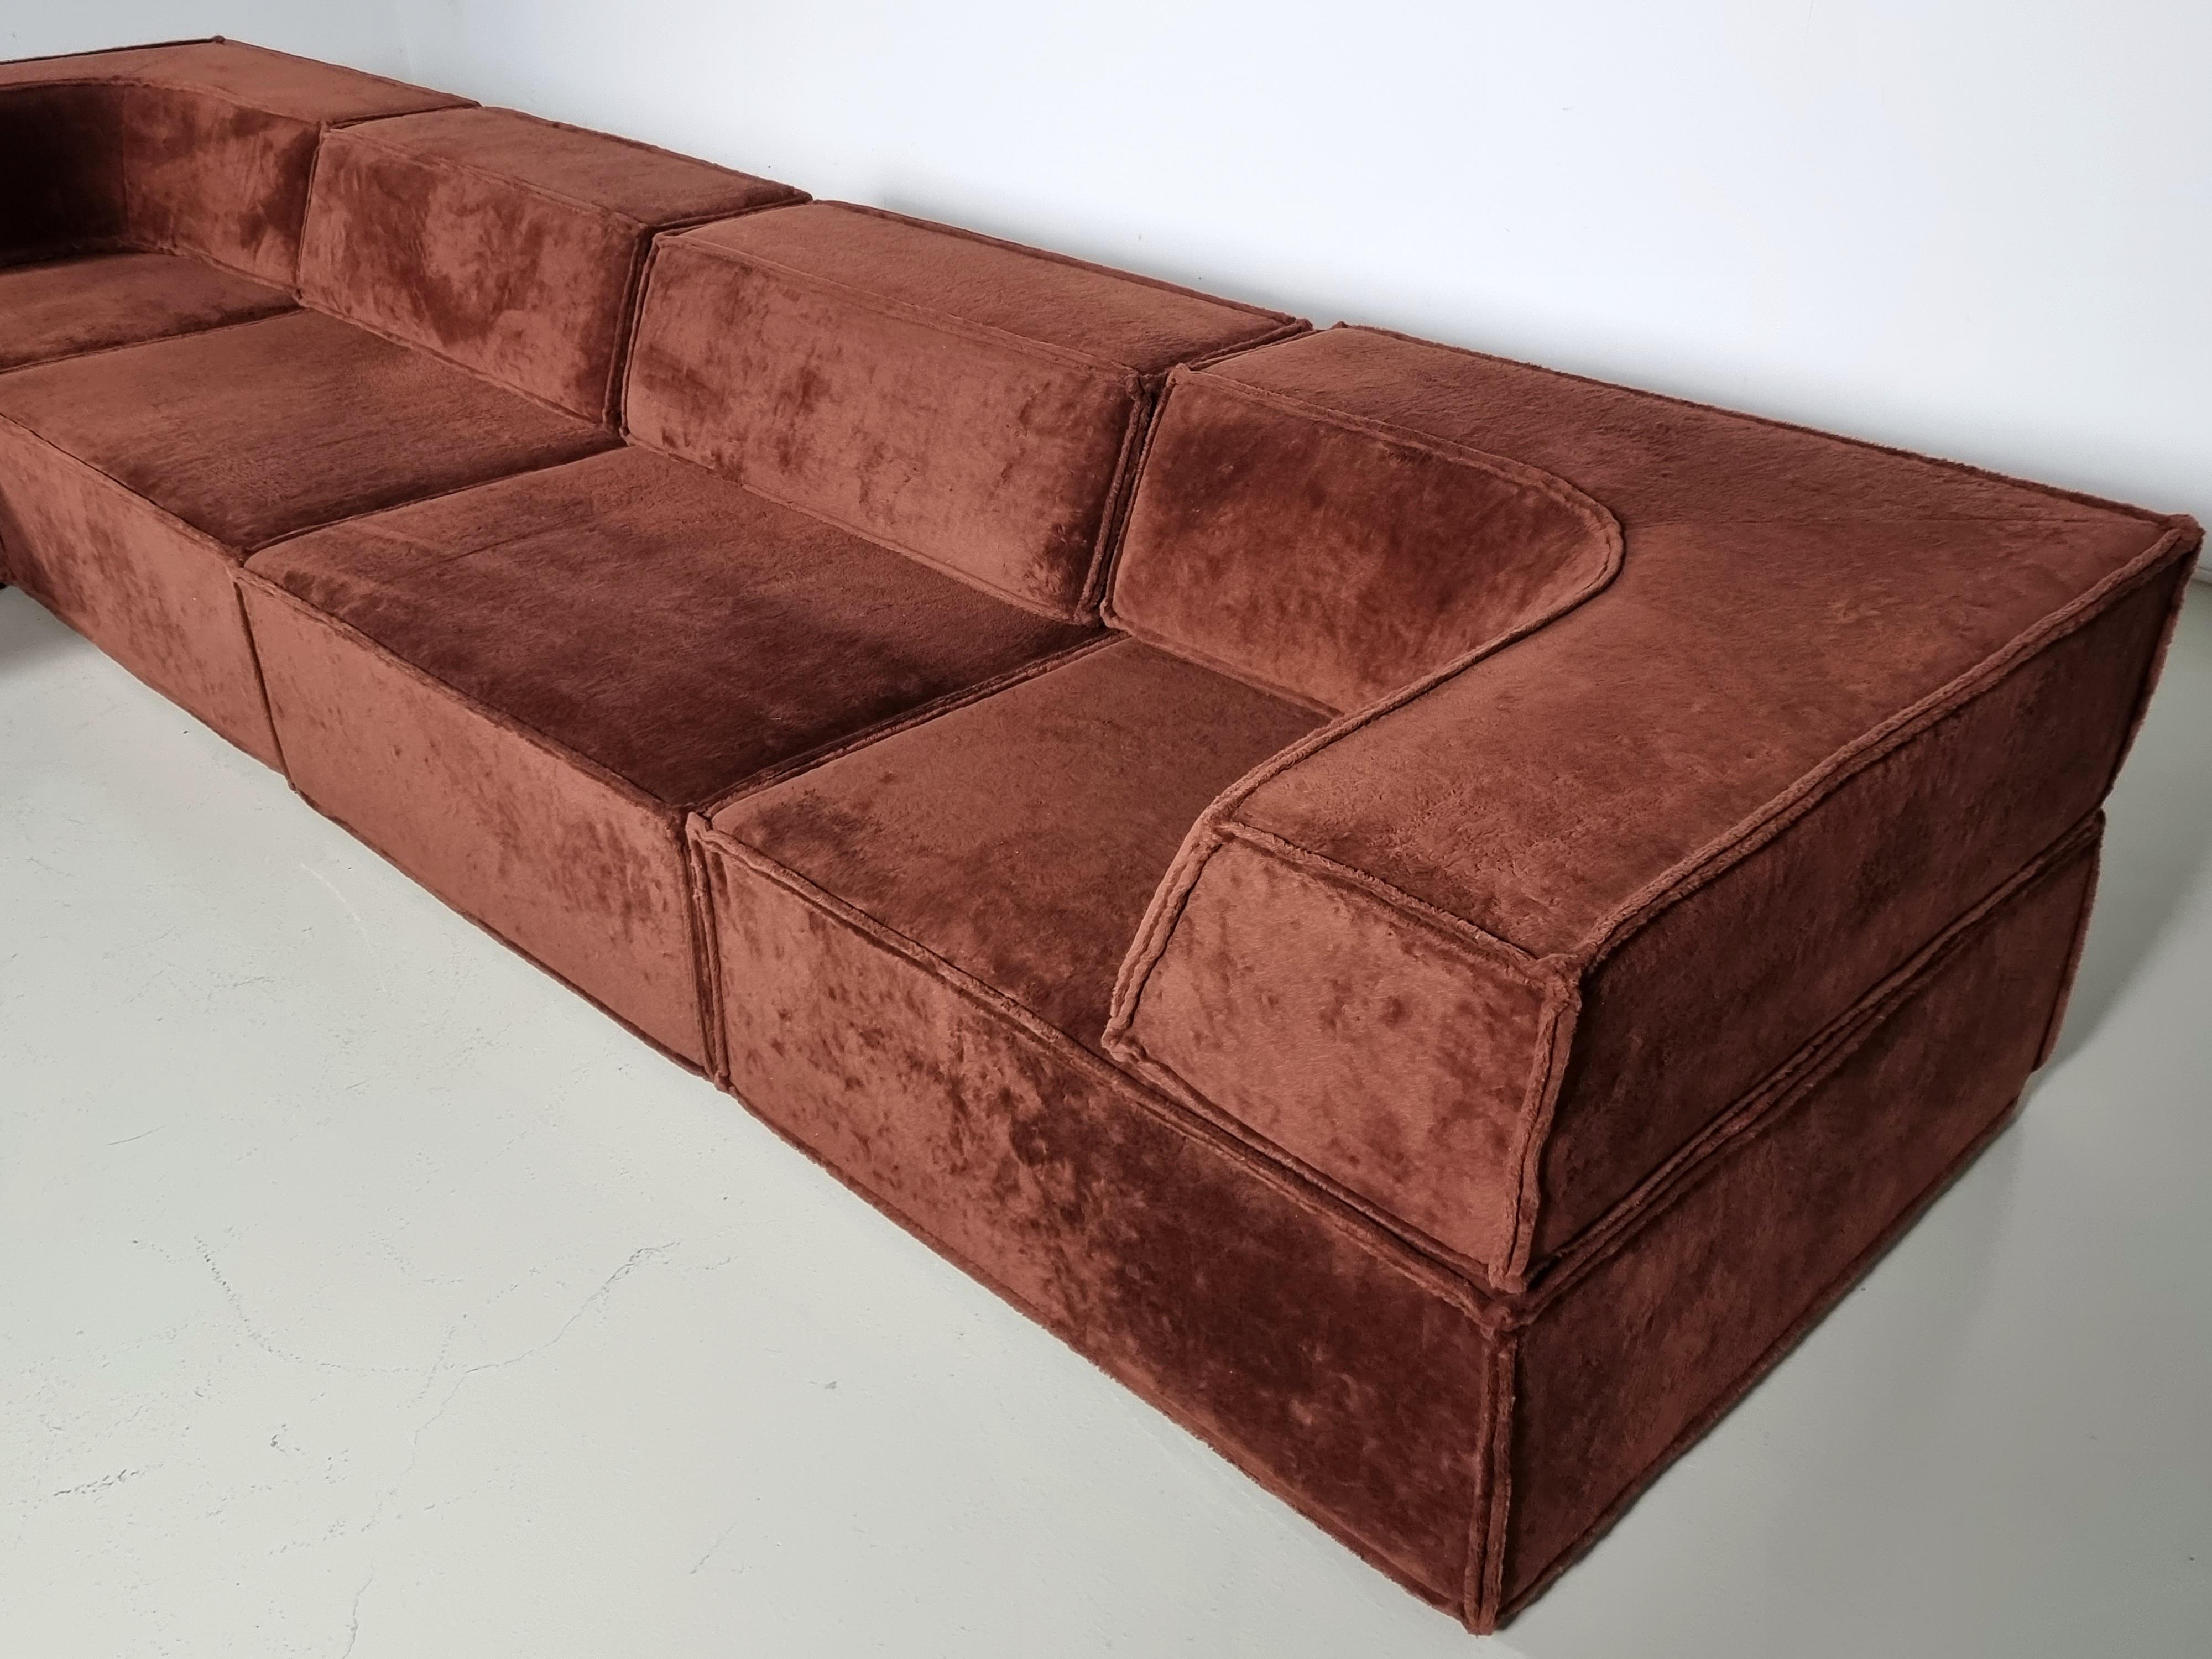 COR Trio Sofa by Team Form Ag in brown original fabric, COR Furniture, Germany 2